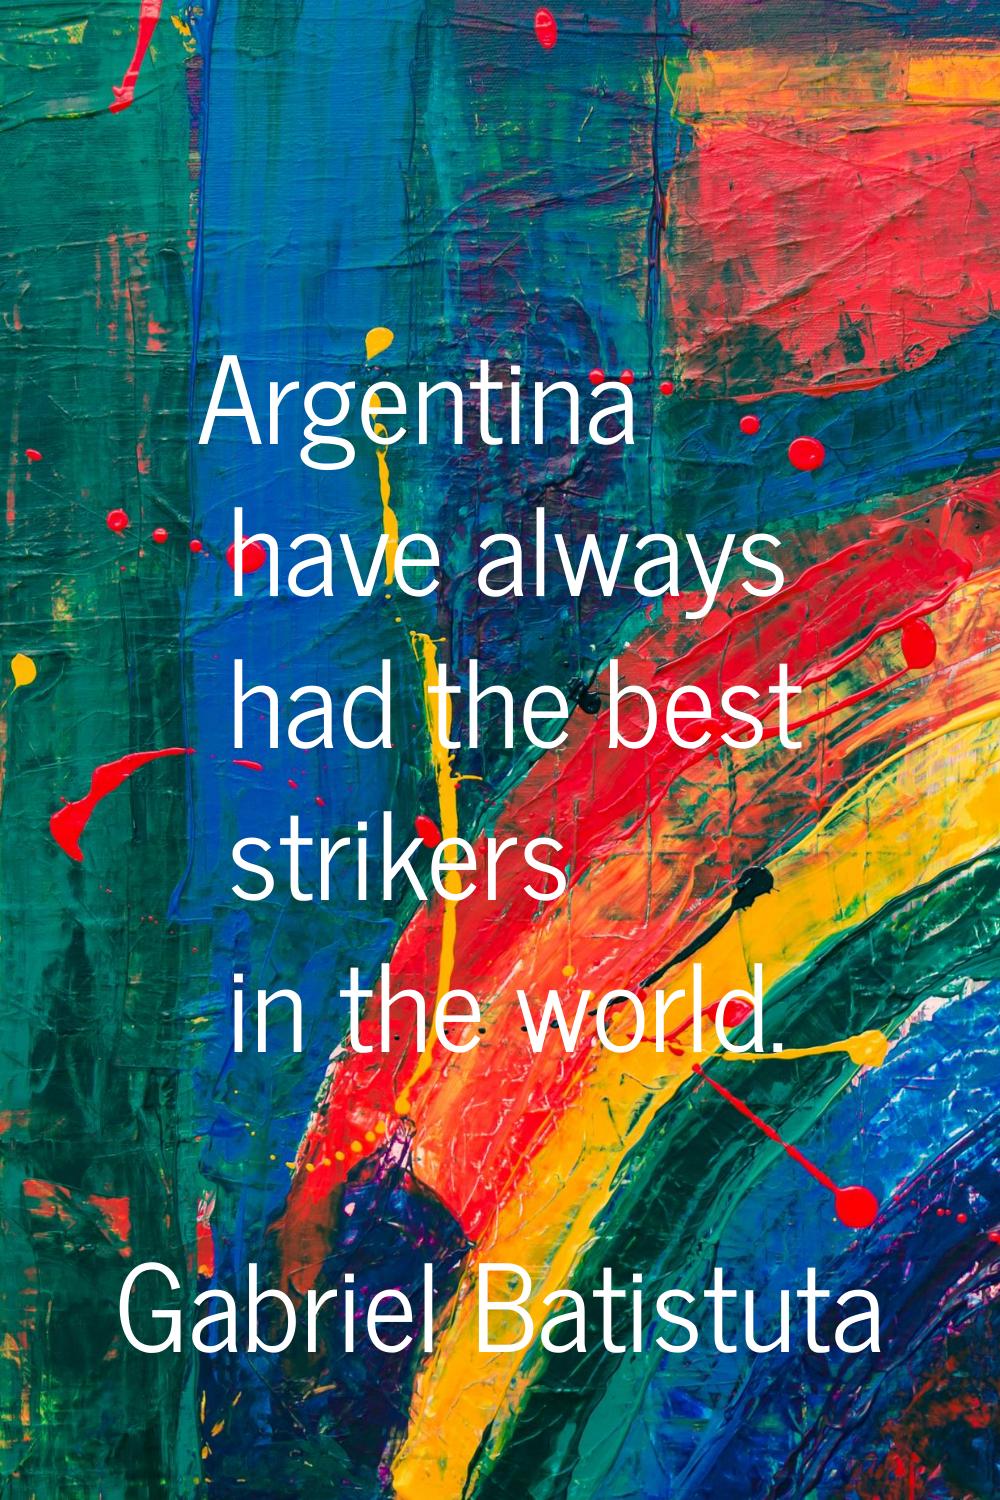 Argentina have always had the best strikers in the world.